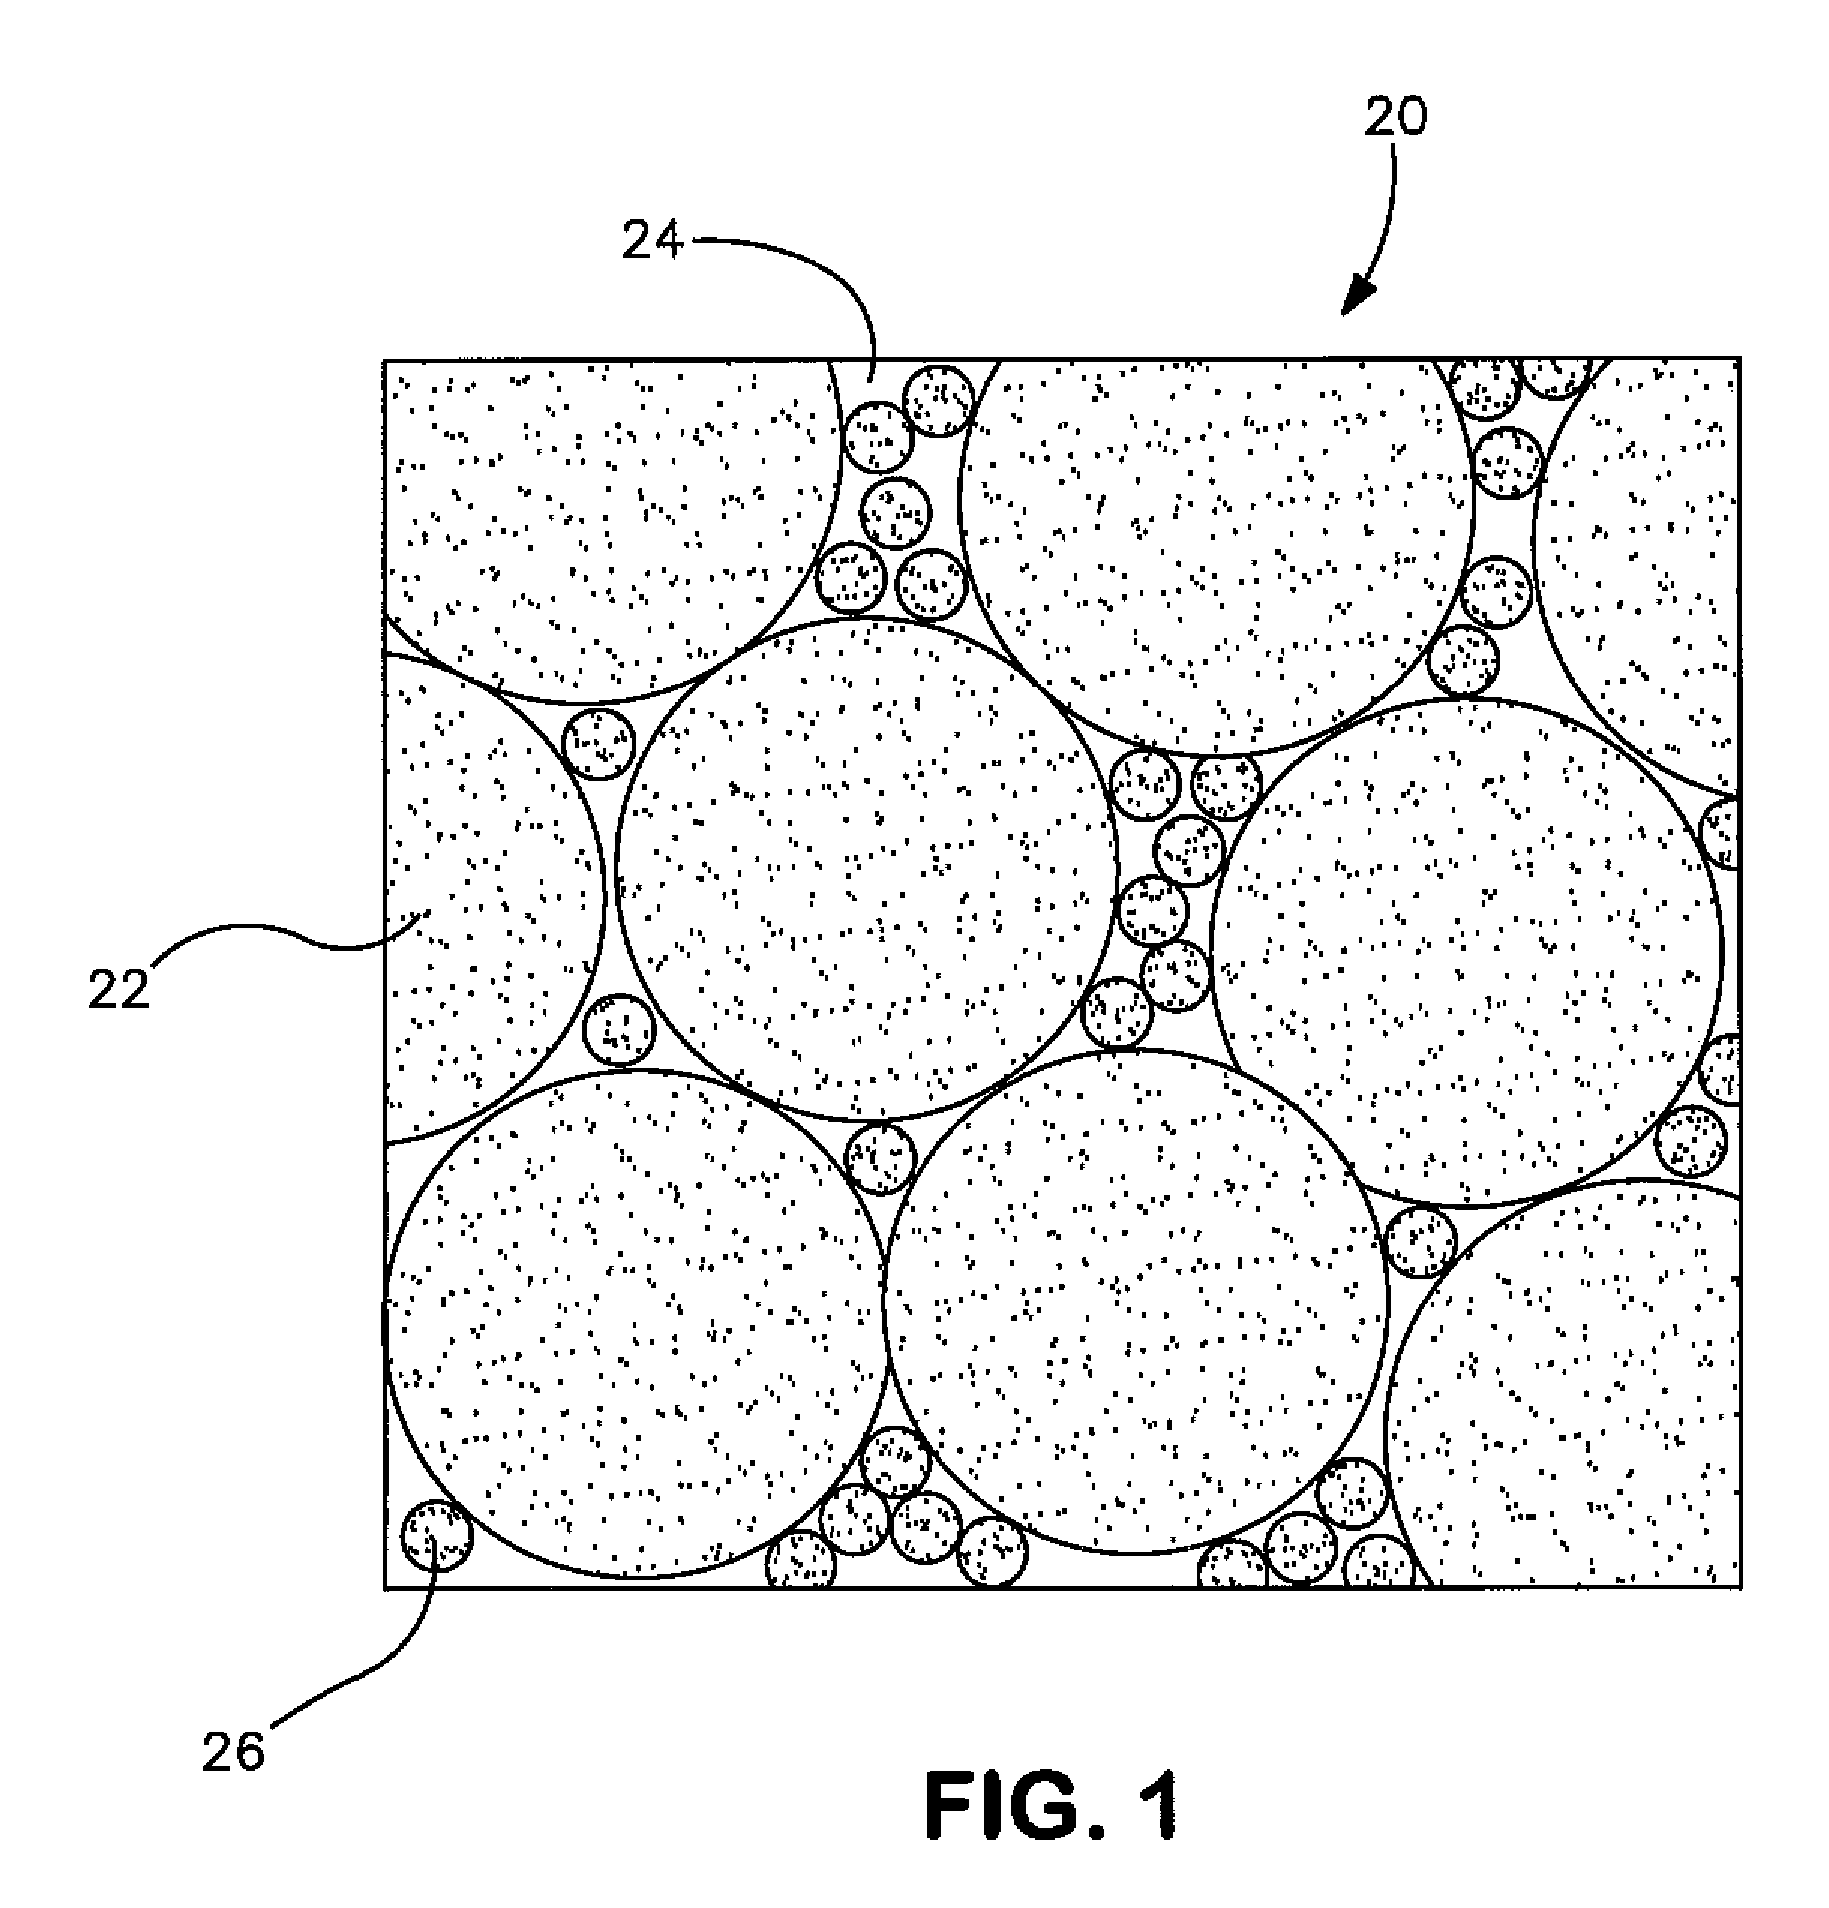 Capacitor Anode Formed From a Powder Containing Coarse Agglomerates and Fine Agglomerates